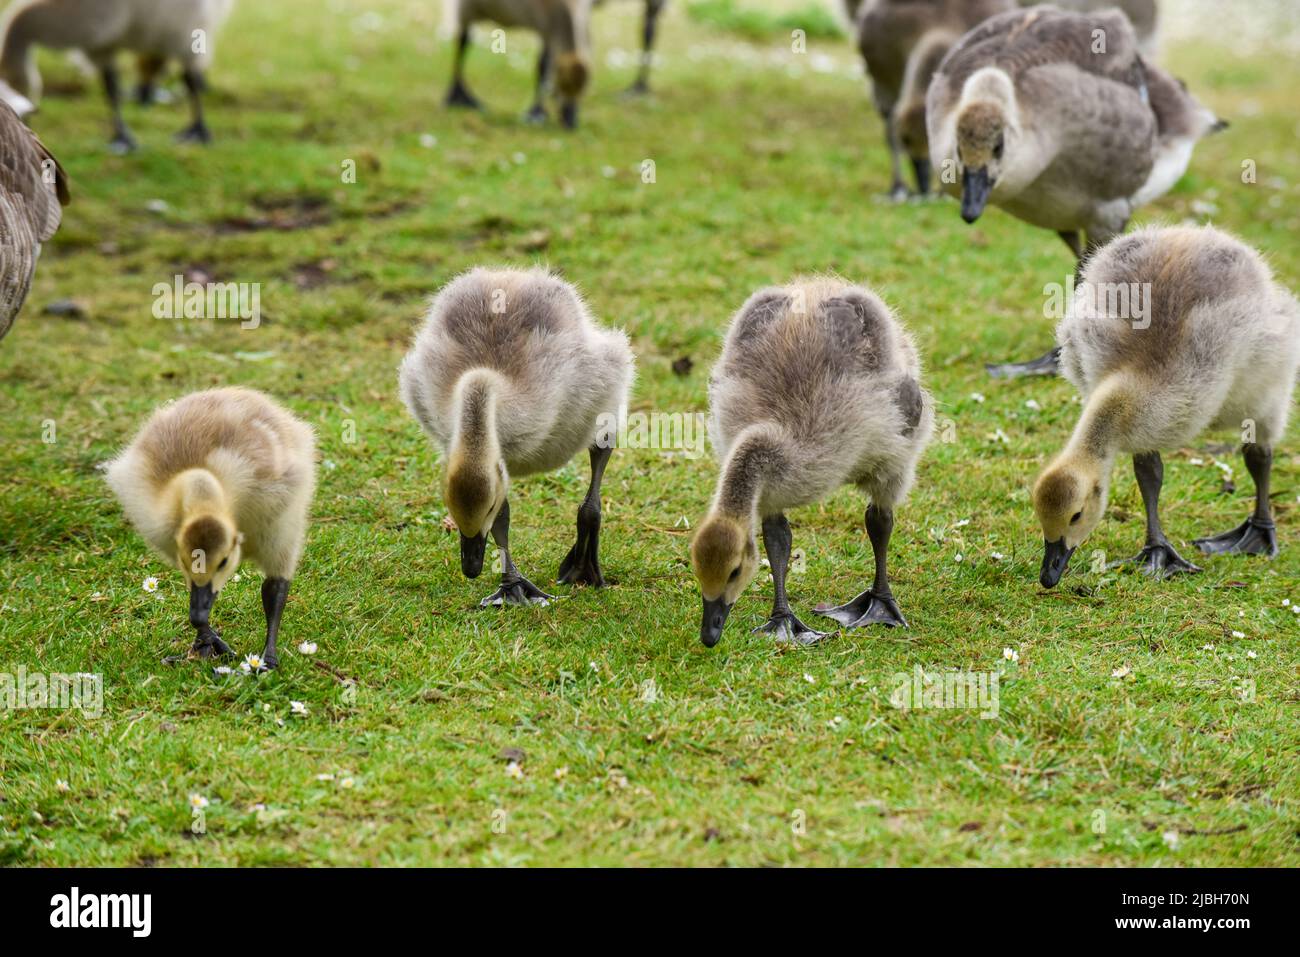 Baby goose chicks or goslings feed at the river bank protected by adult geese Stock Photo